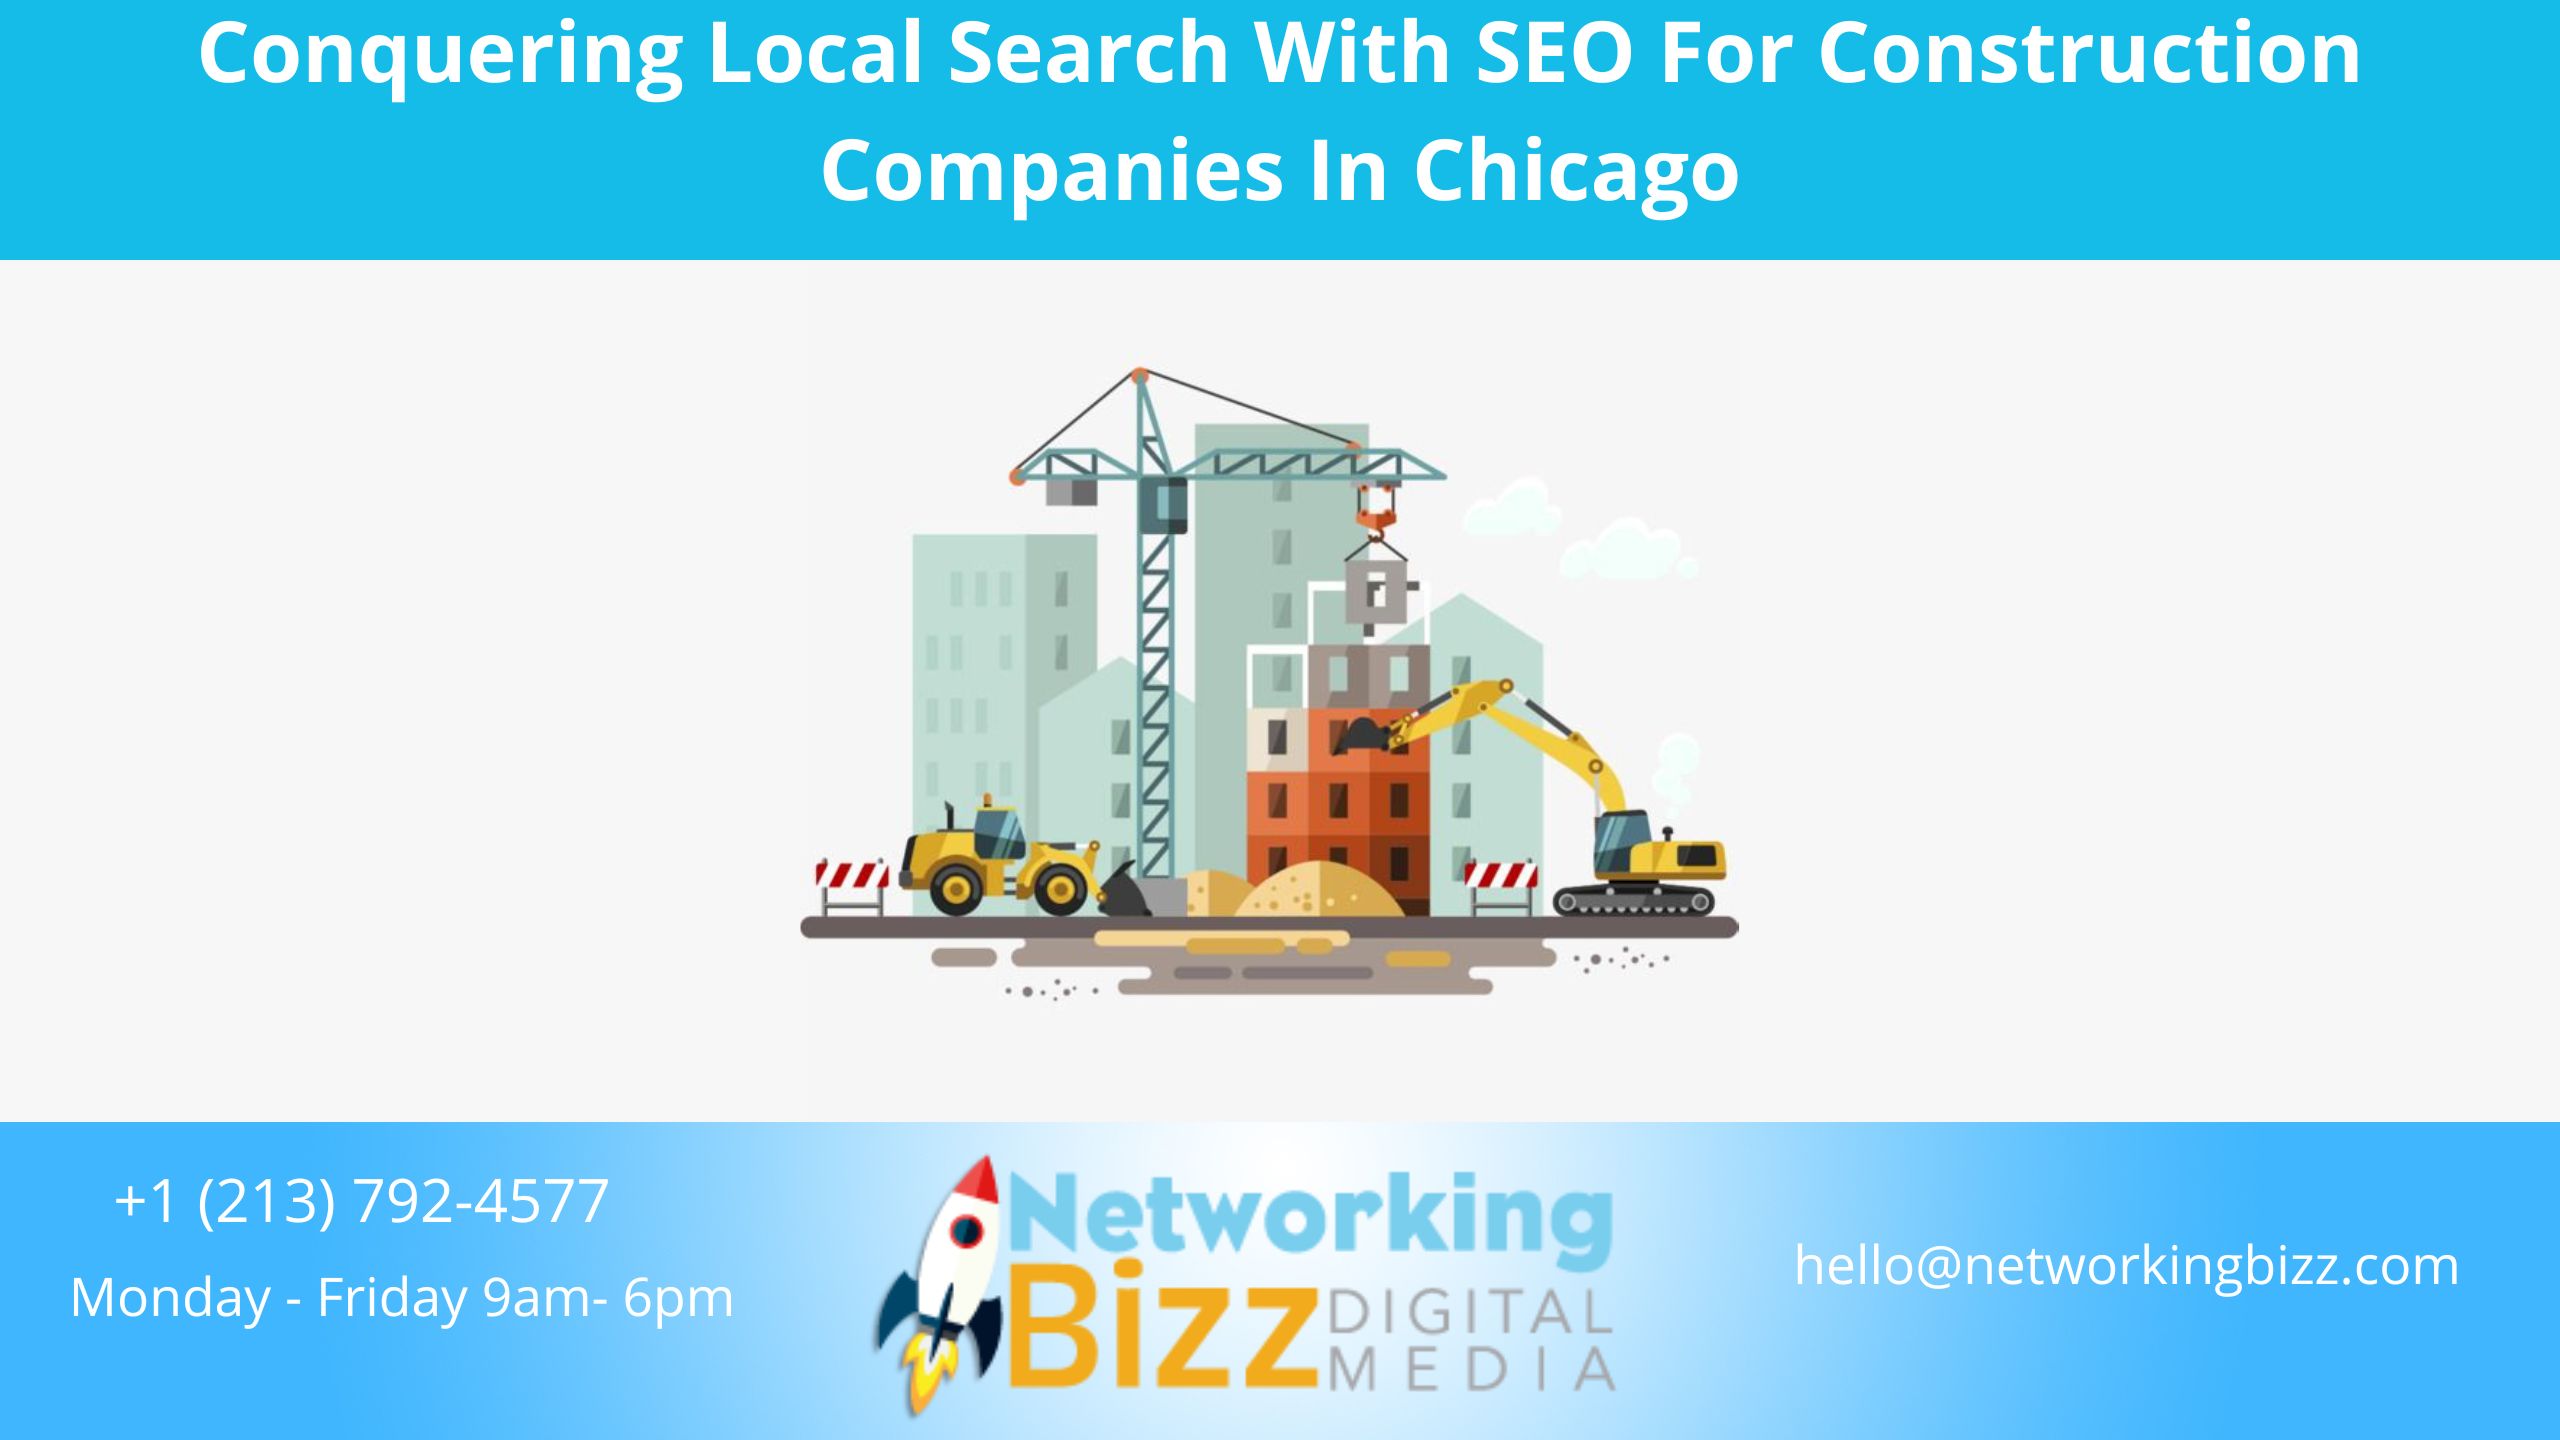 Conquering Local Search With SEO For Construction Companies In Chicago